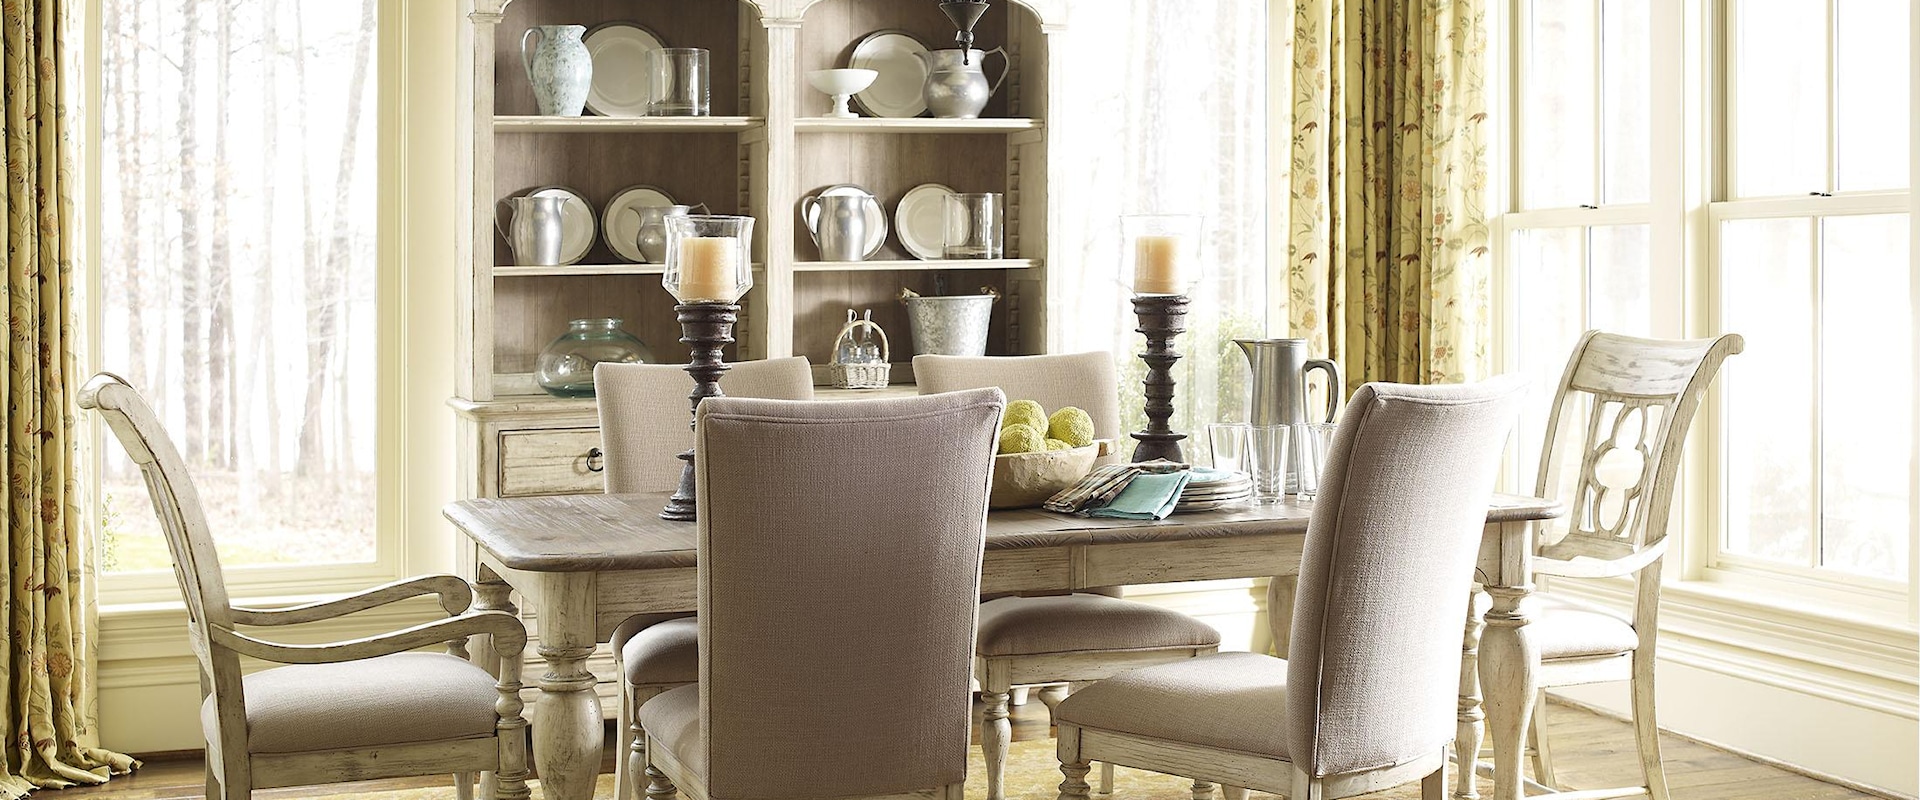 Formal Dining Room Group 2